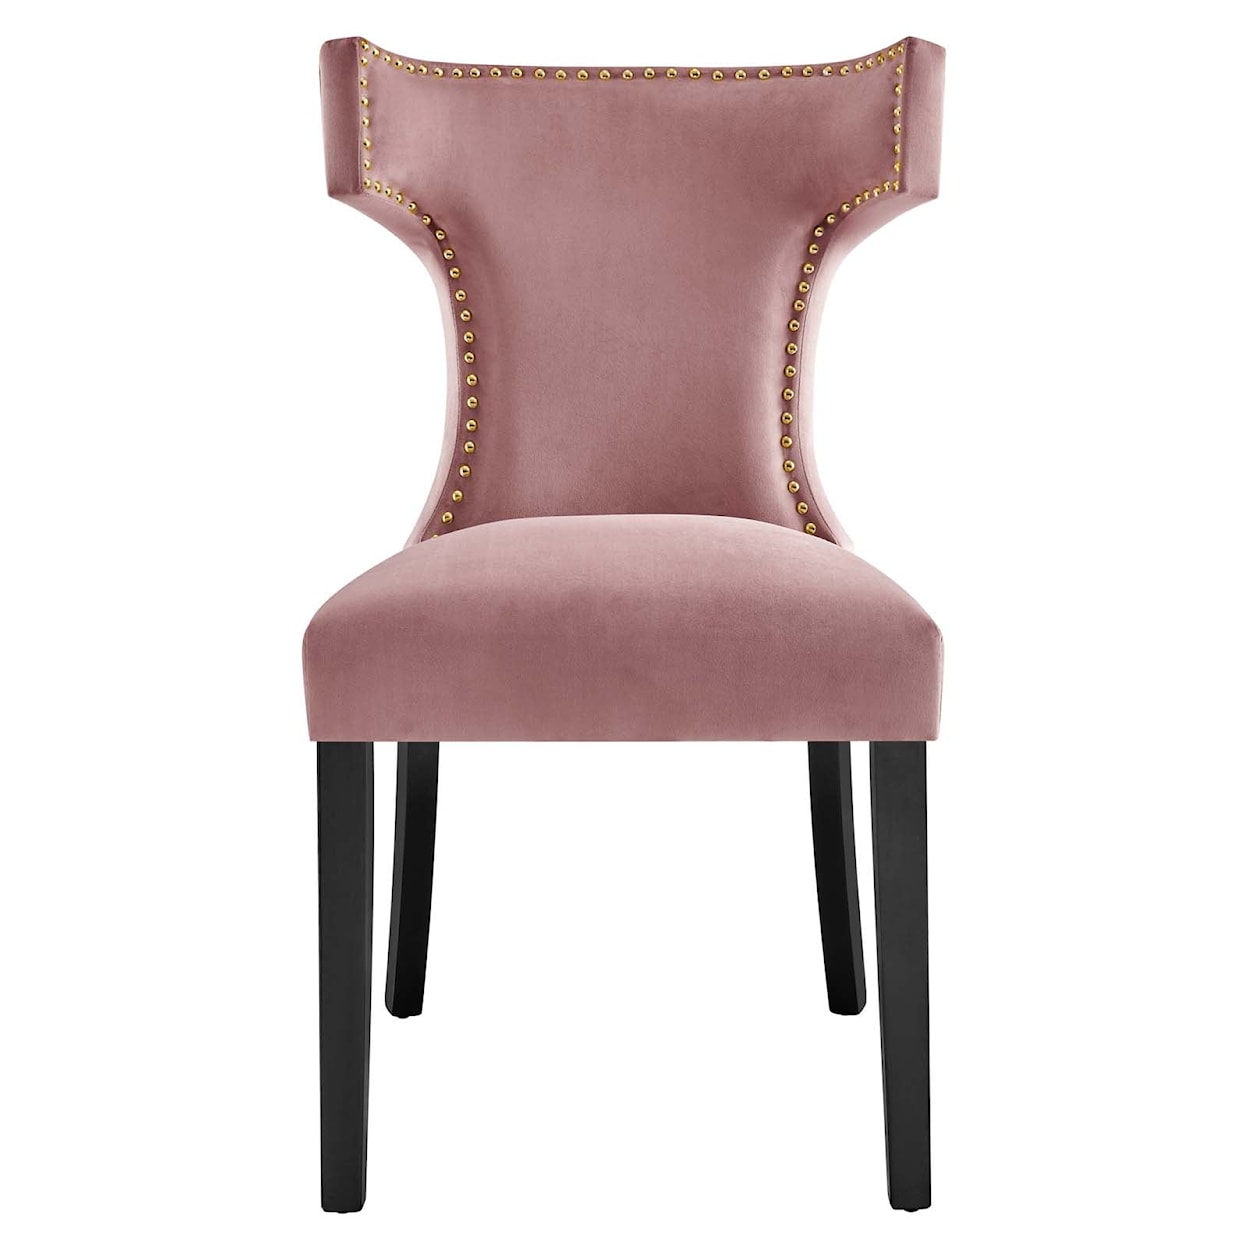 Modway Curve Curve Velvet Dining Chairs - Set of 2